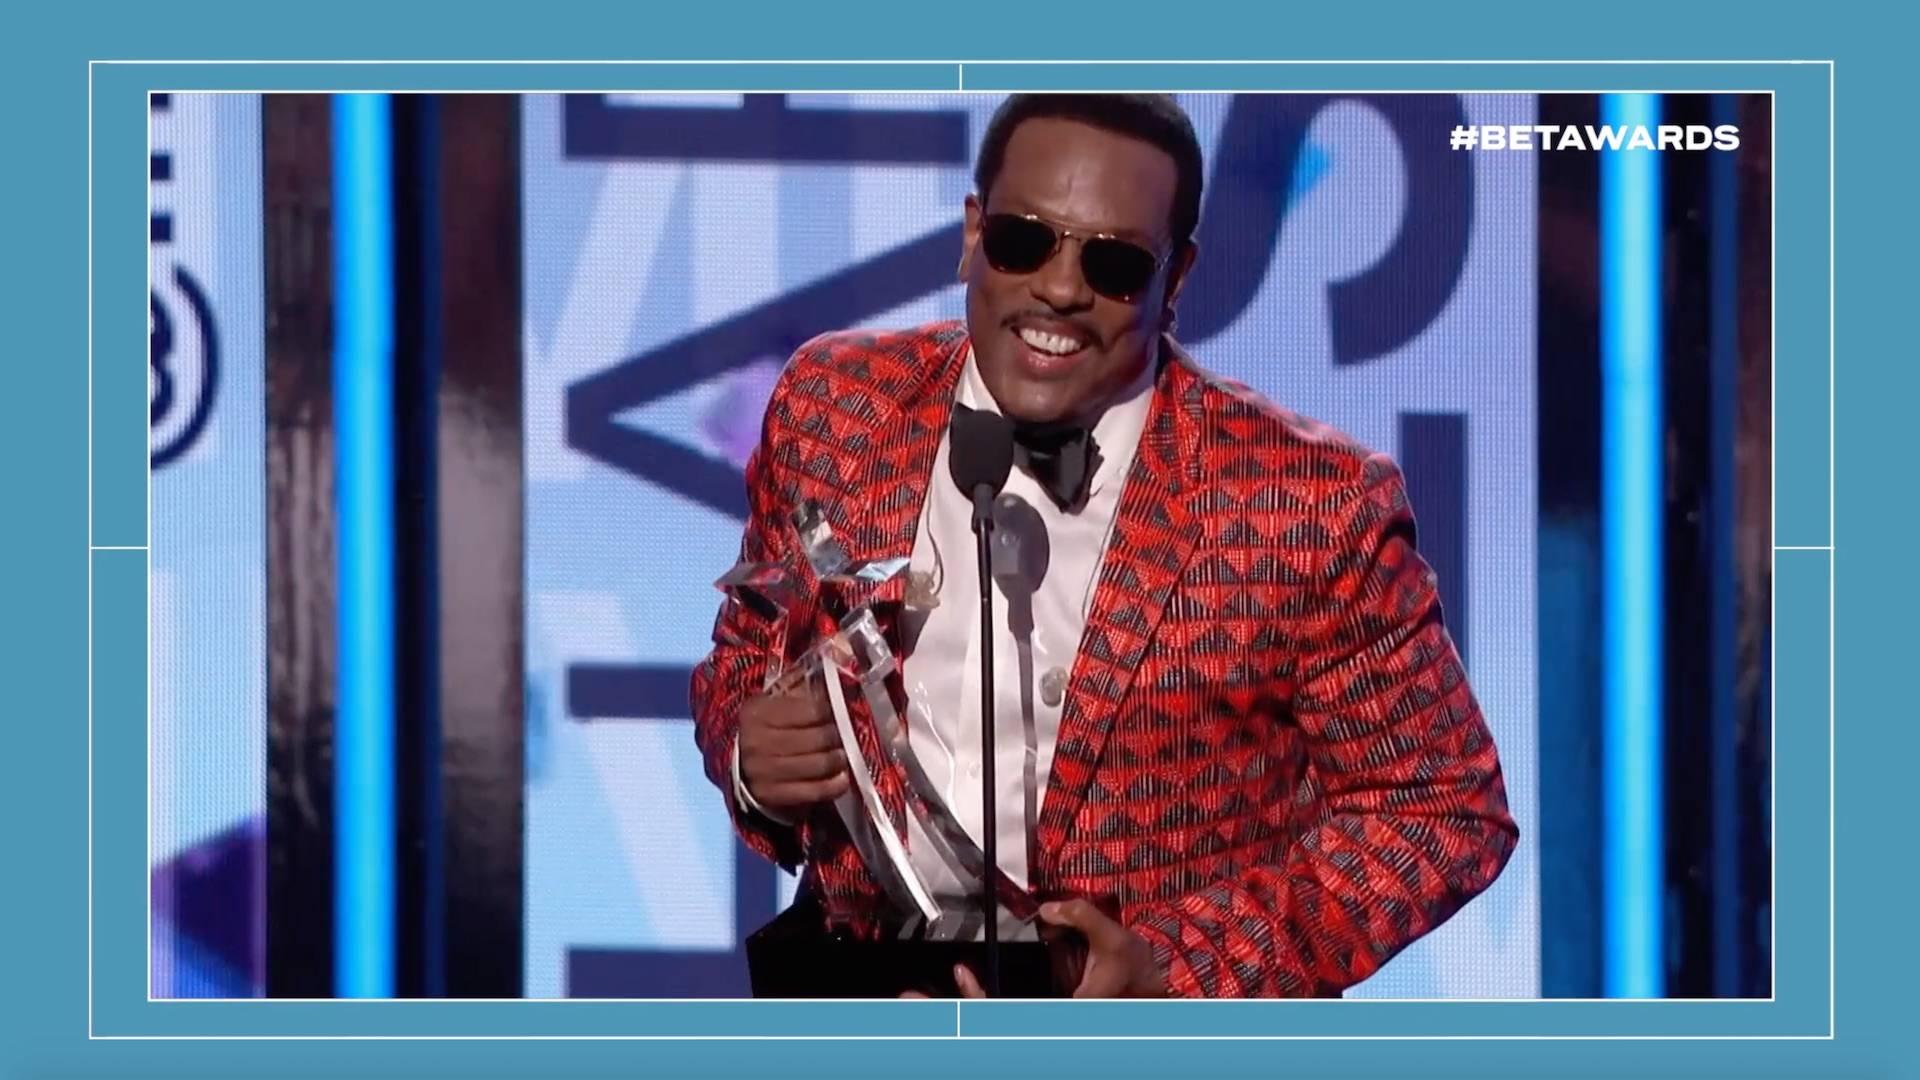 20 Years of BET Lifetime Achievement Awards BET Awards 2020 (Video